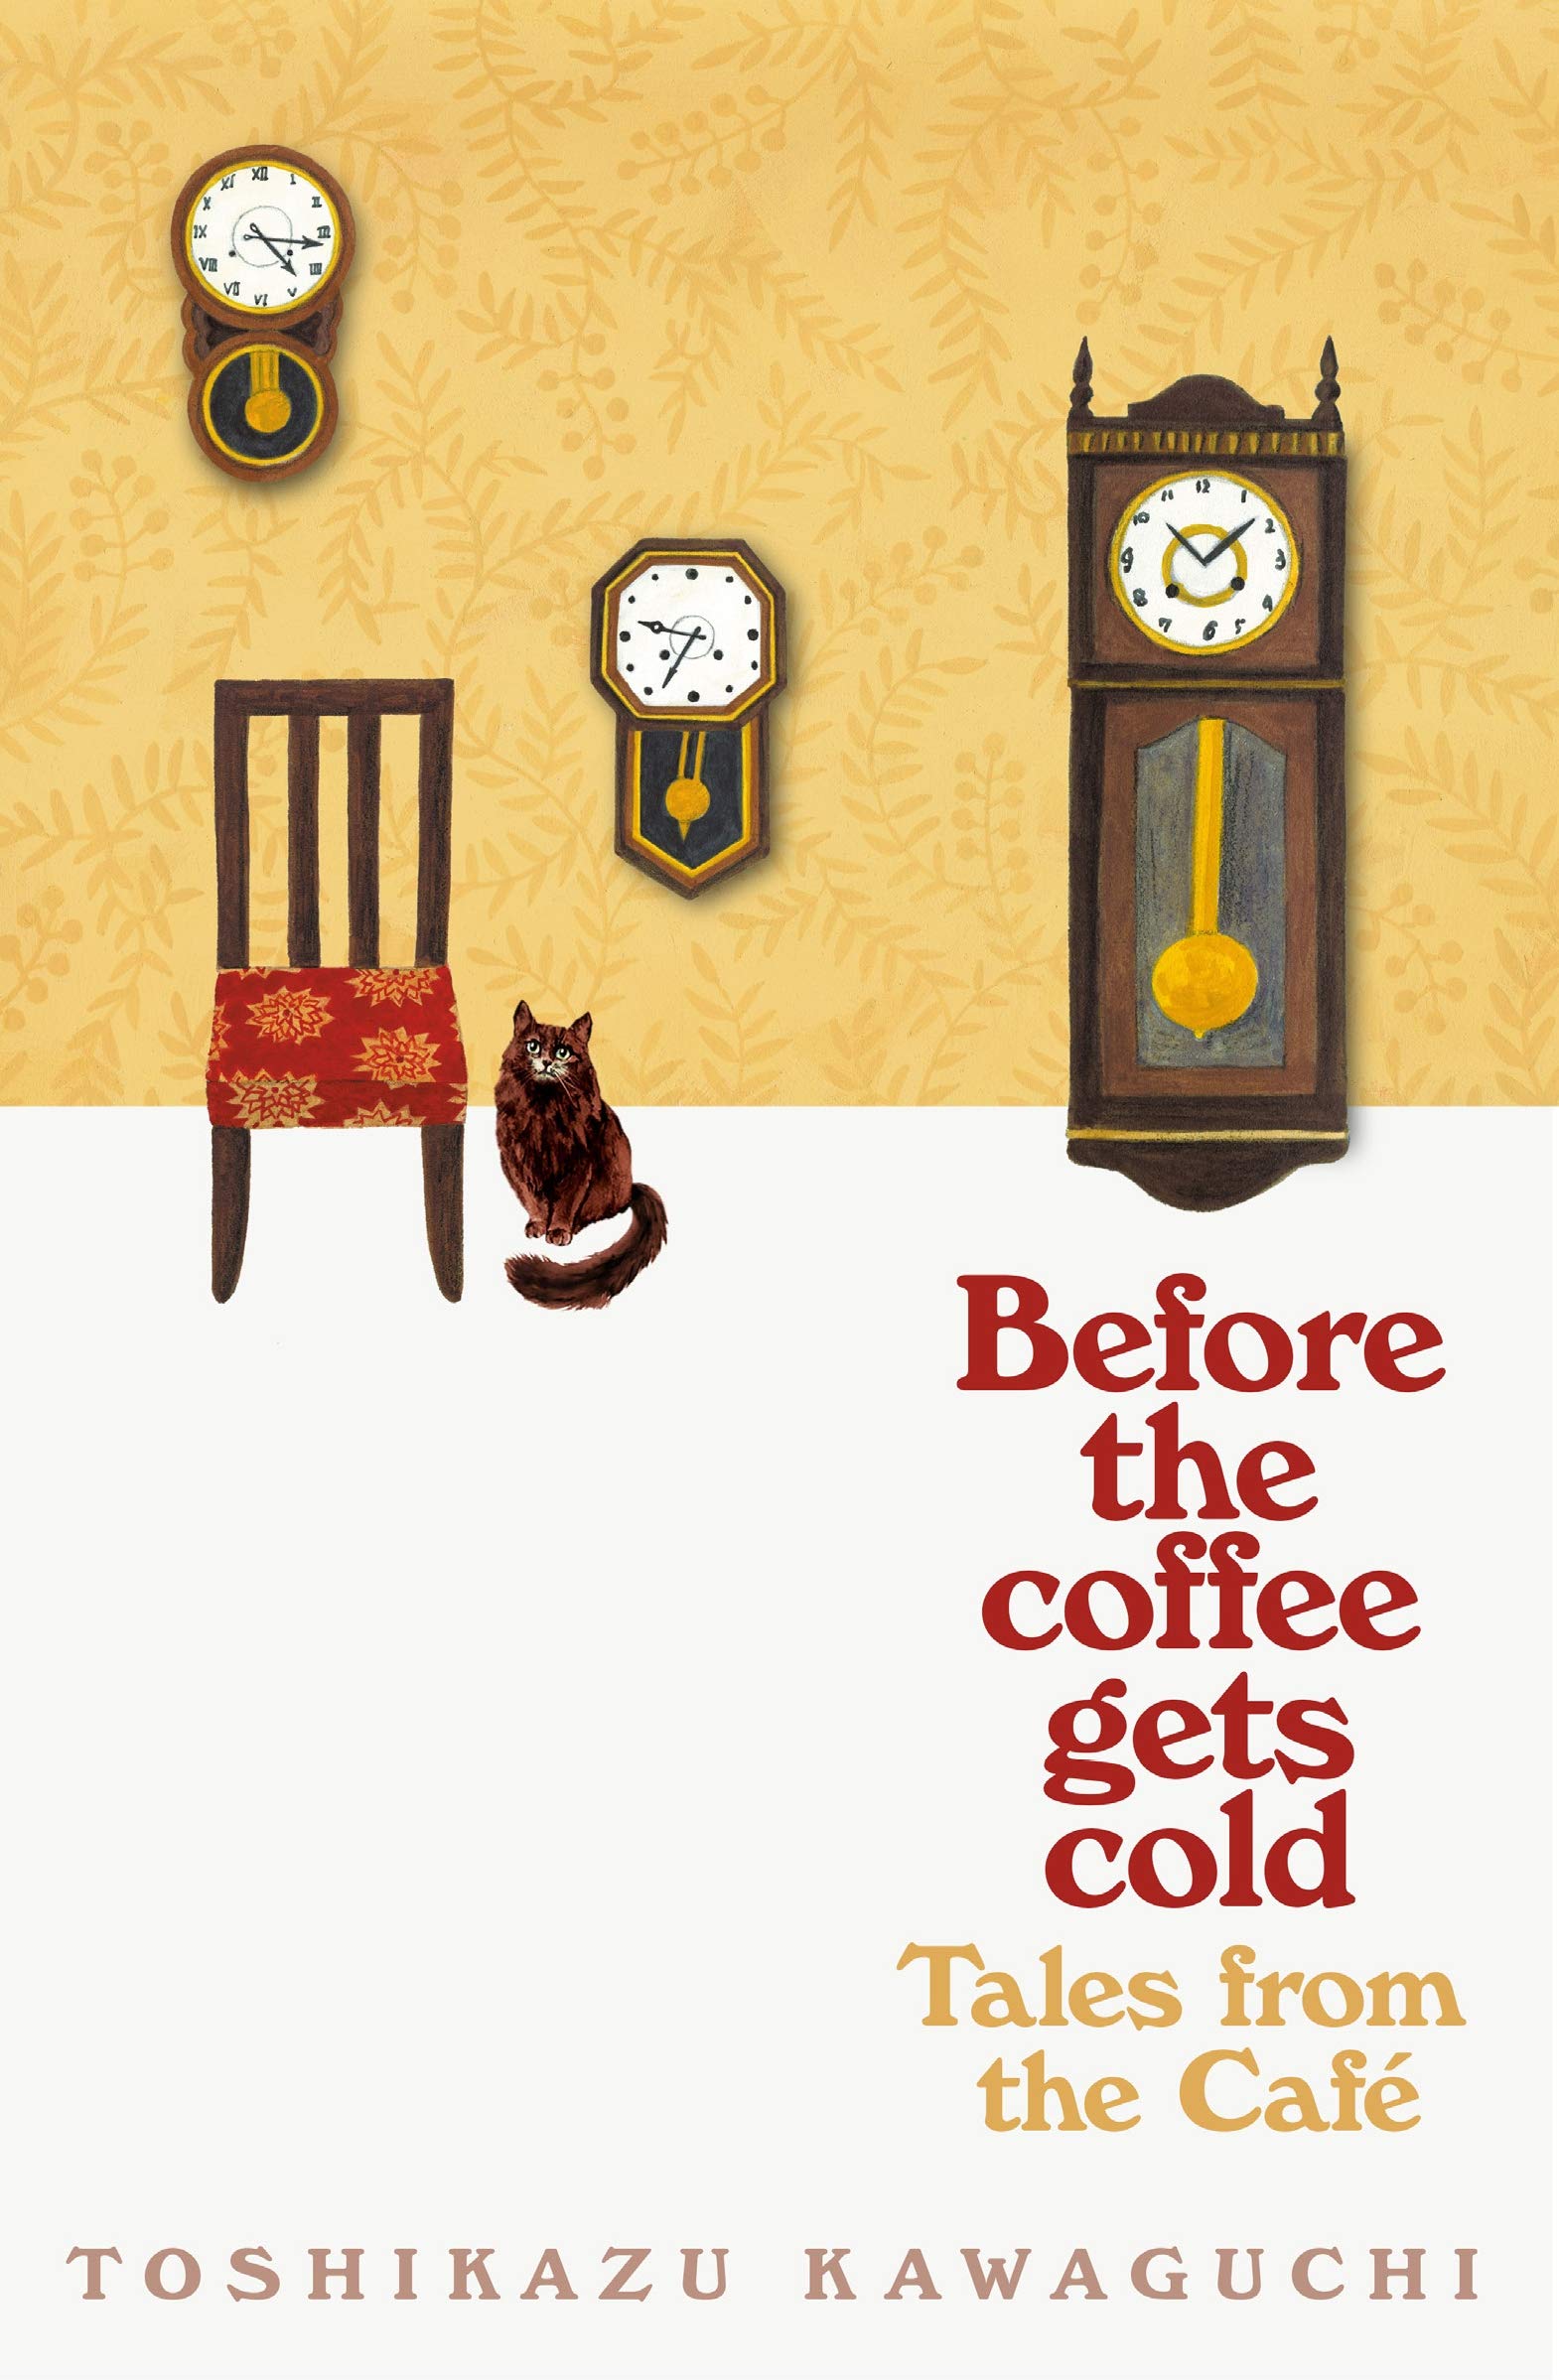 BEFORE THE COFFEE GETS COLD: TALES FROM